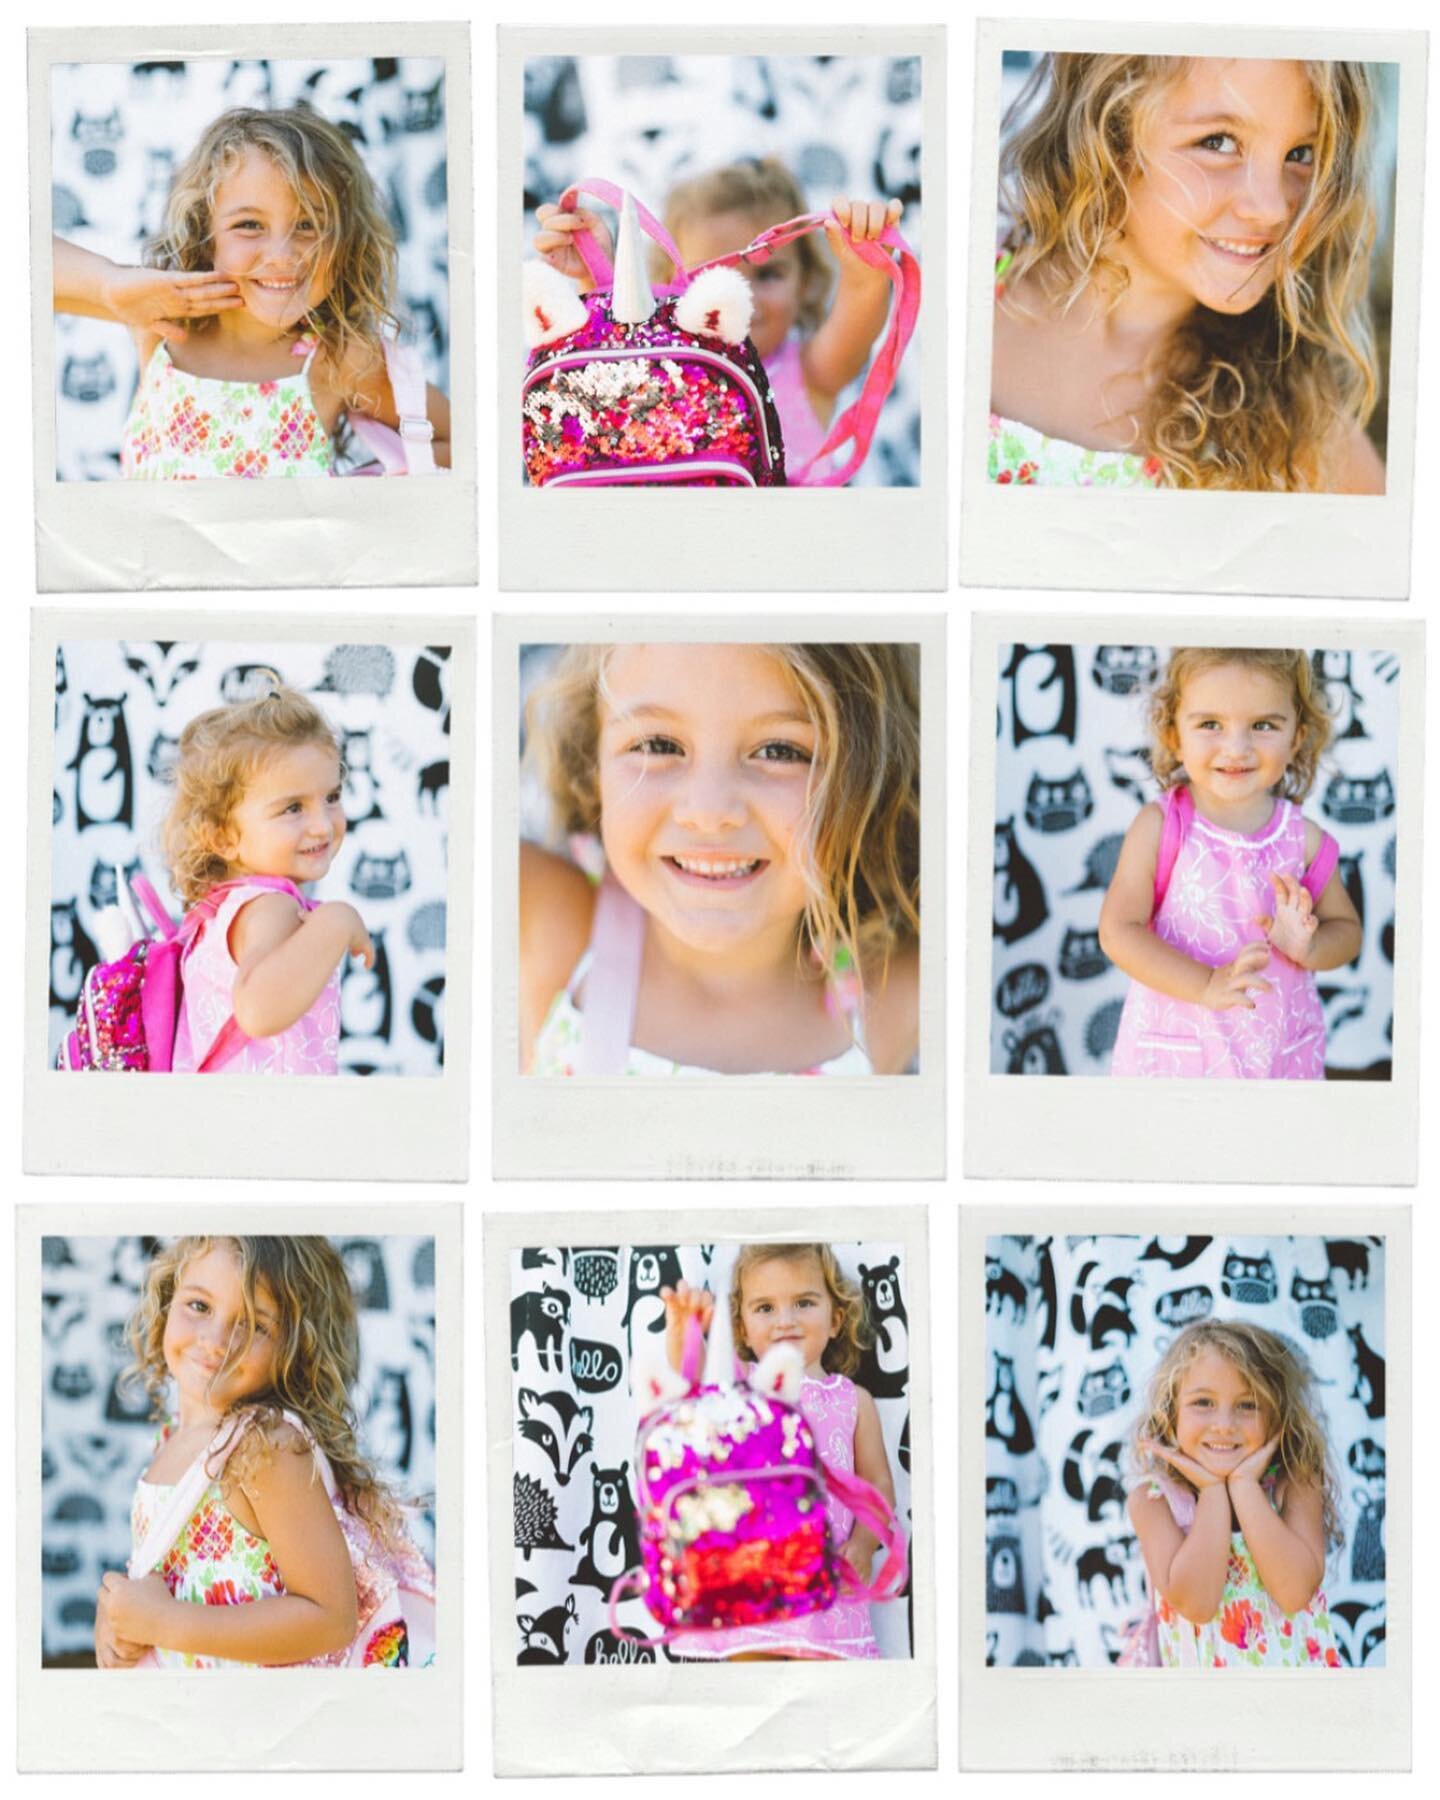 🍎COVID giving you the back to school blues? 📝No school photos this year? ...i keep hearing ... well here i am for all things FUN ☀️Let&rsquo;s turn that frown upside down with  an awesome photo mini studio-sessions for you and your keiki. An specia